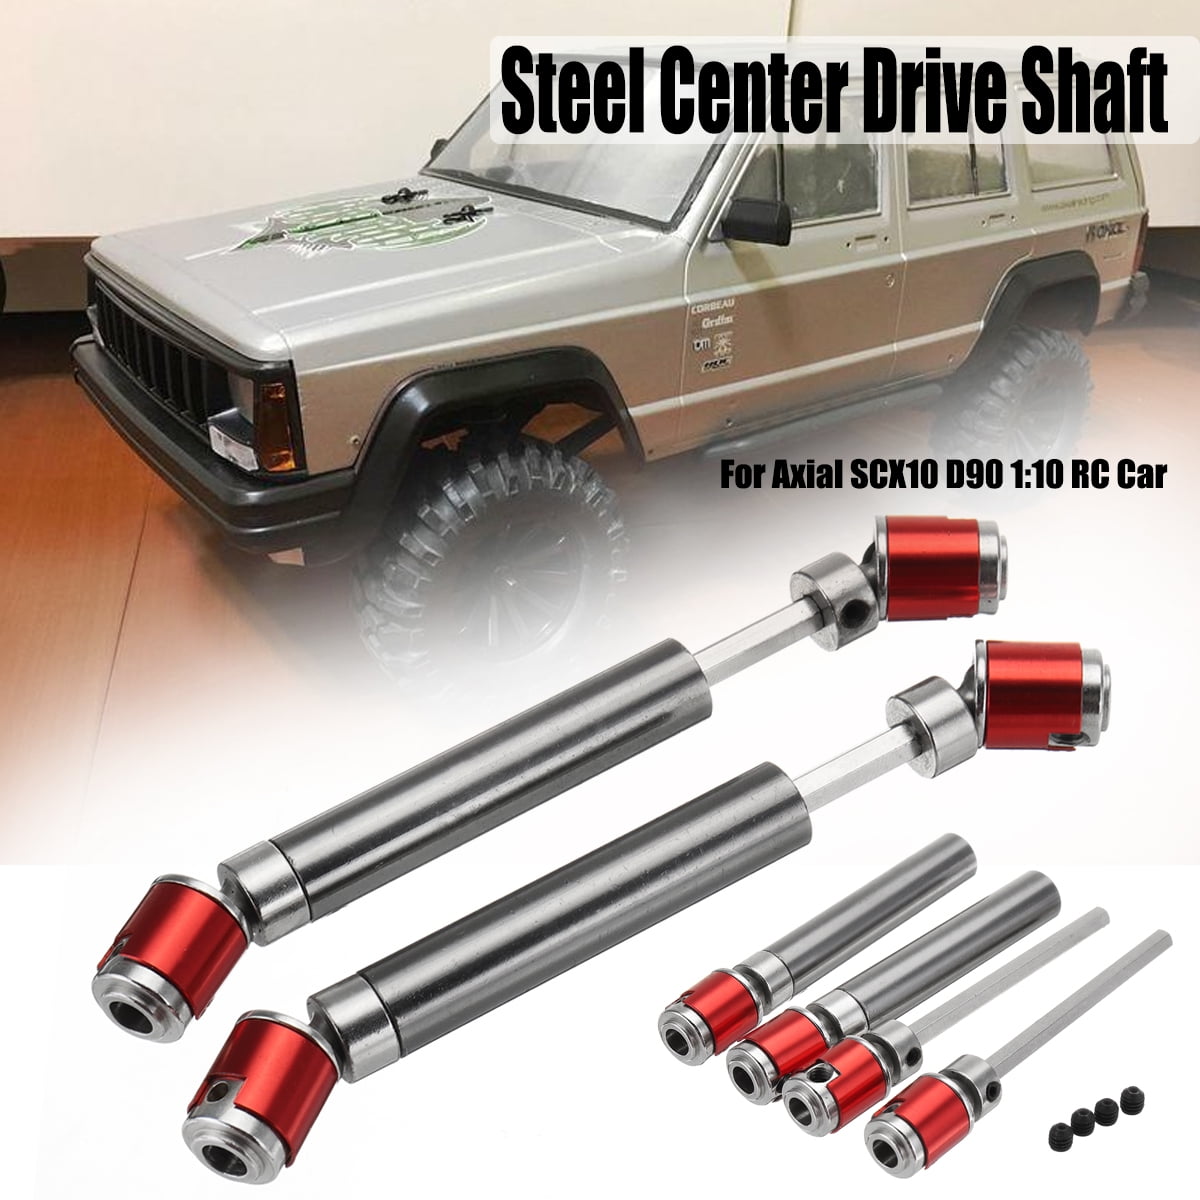 Universal Steel Center Drive Shafts For AXIAL SCX10 D90 1/10 RC Crawlers Speed